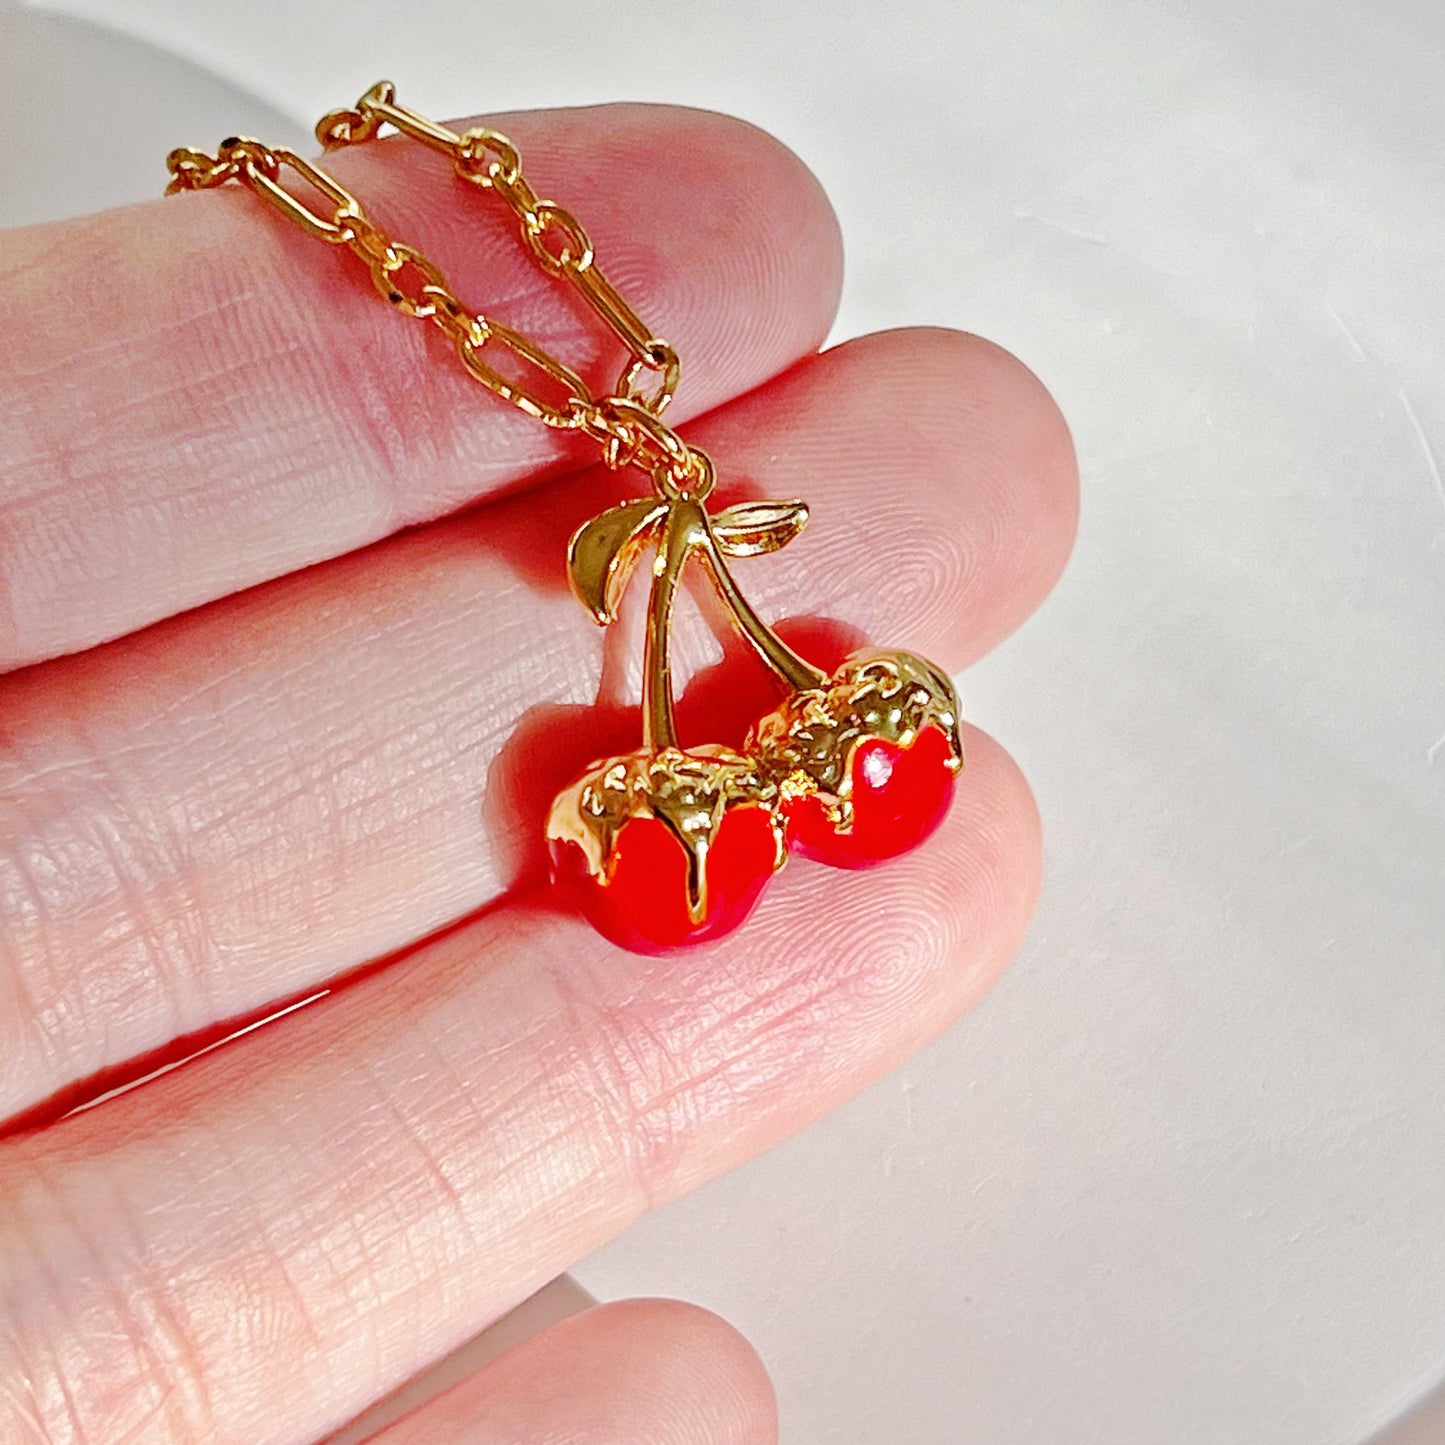 Red Cherry in Gold Chain Necklace-Ninaouity